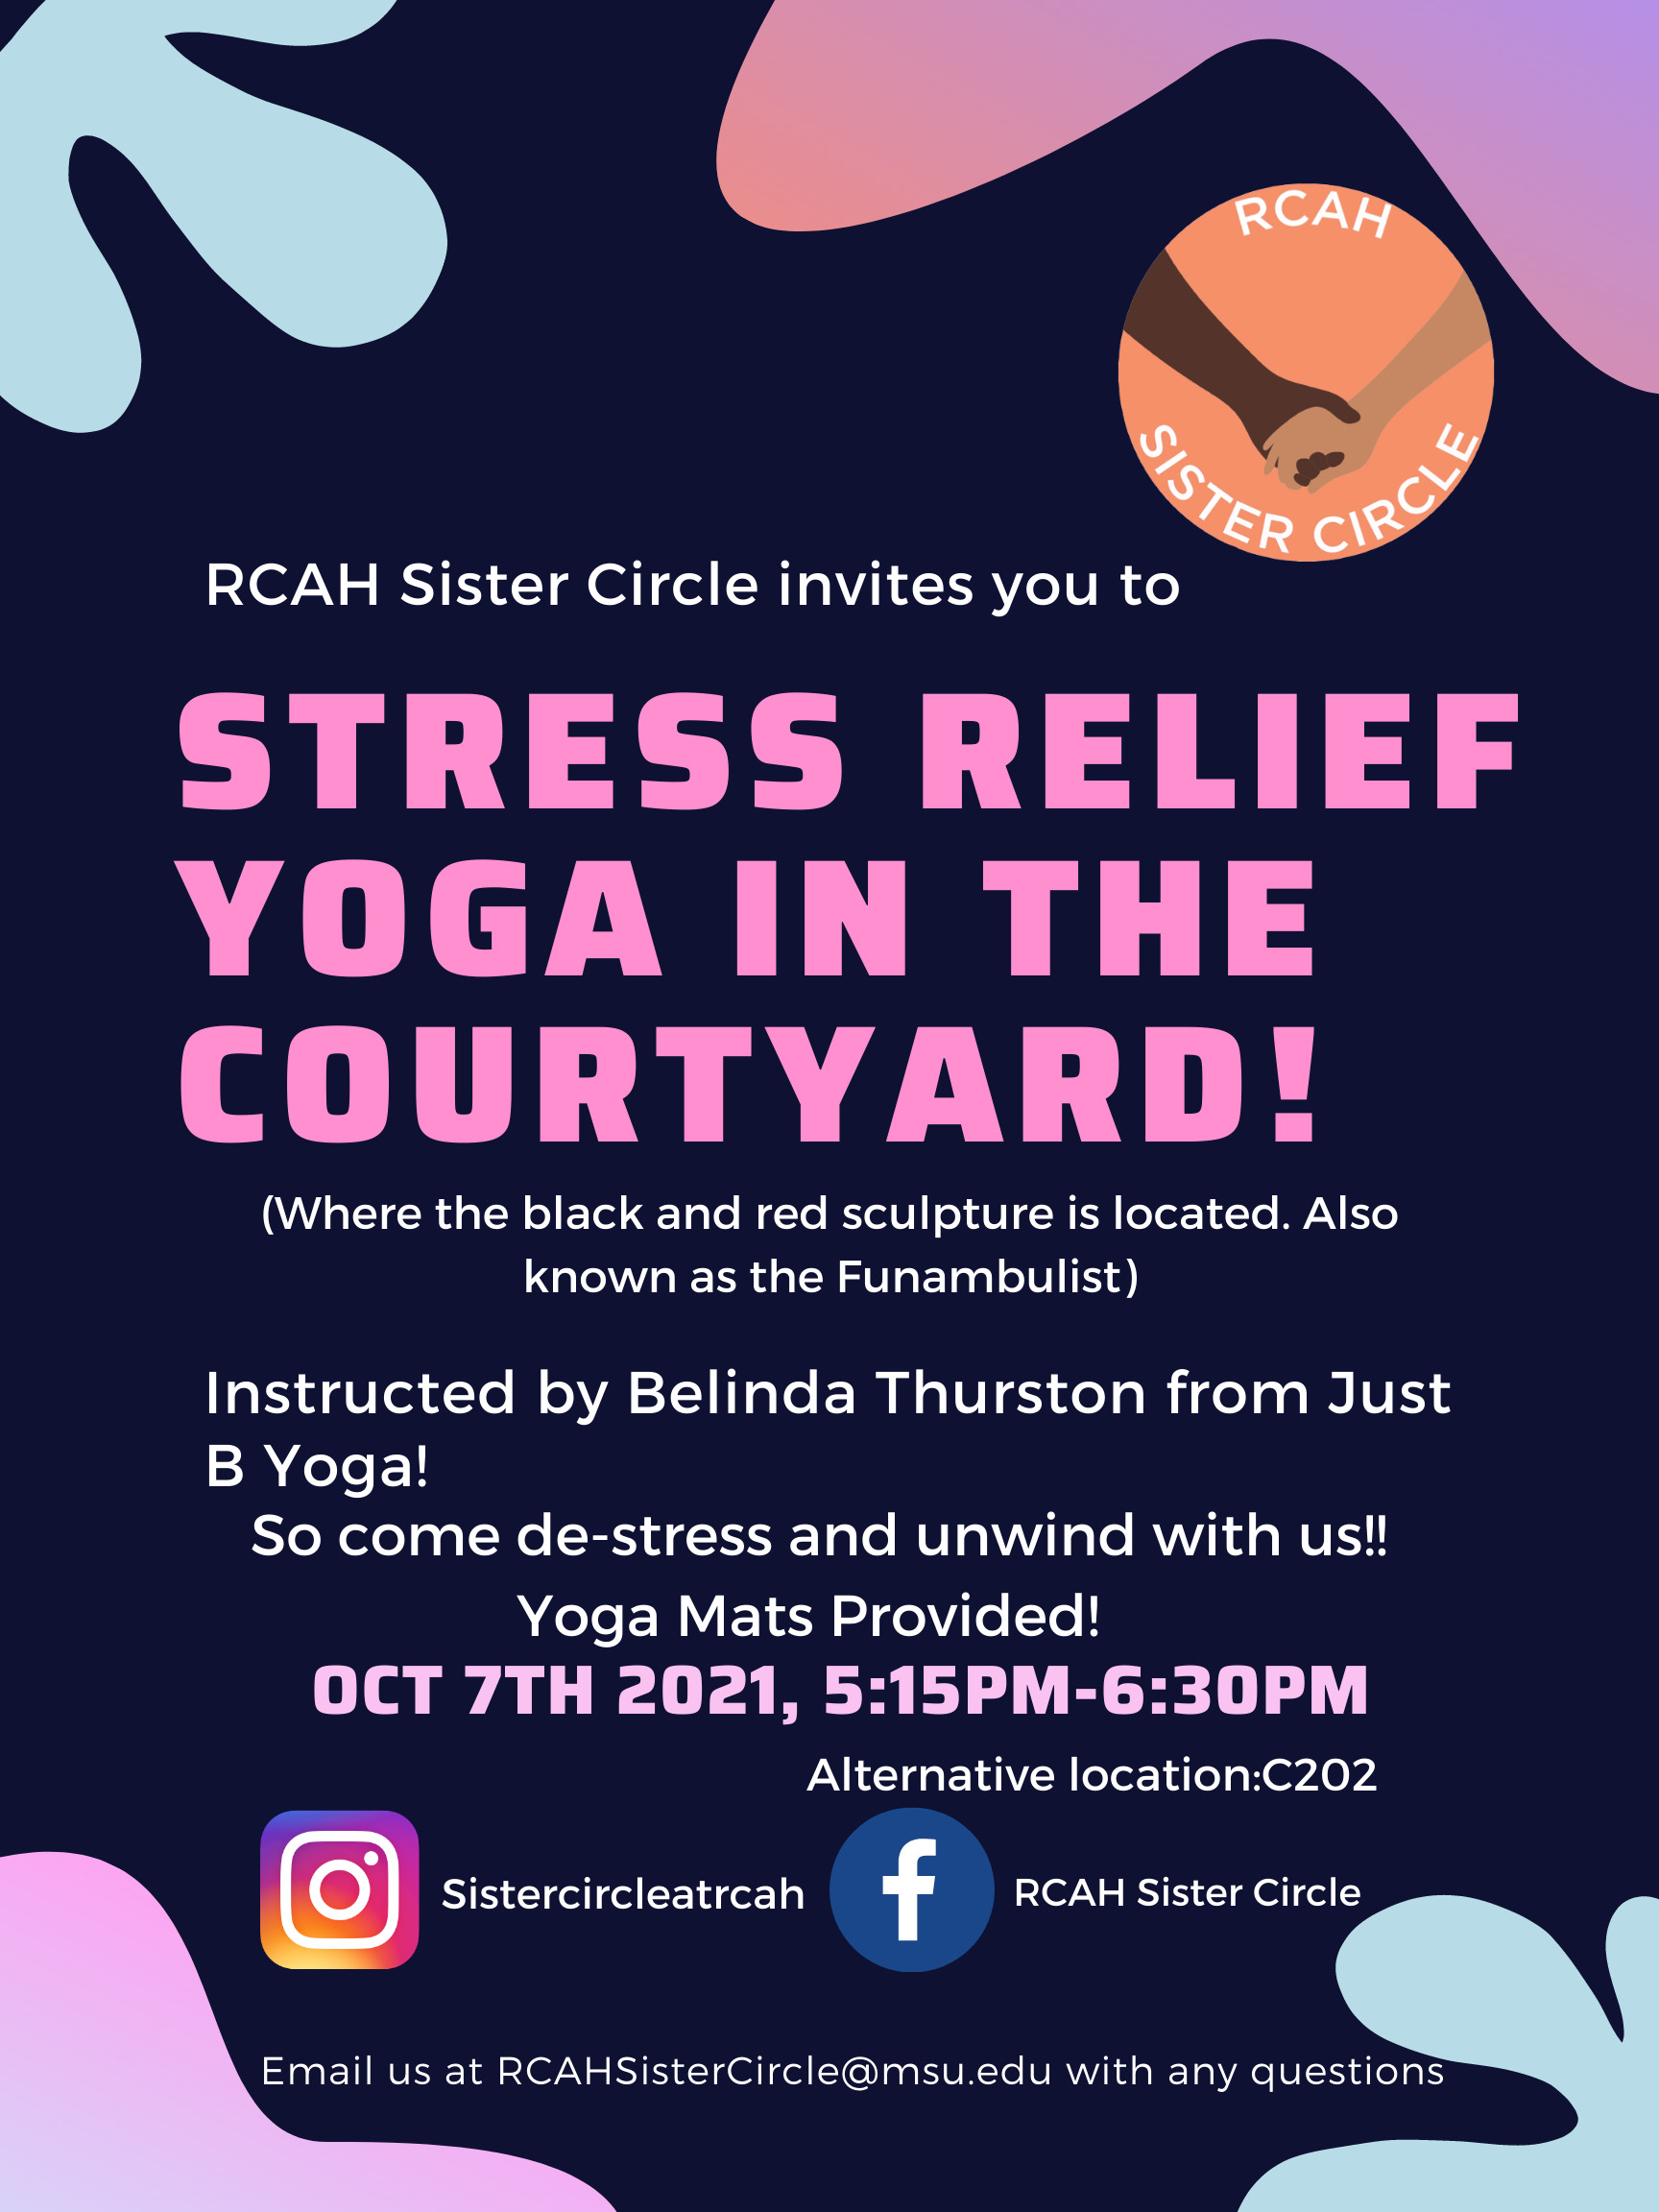 Image is a flyer for the yoga event with a dark background and colorful flowers. Information from the flyer can be read in the text above.